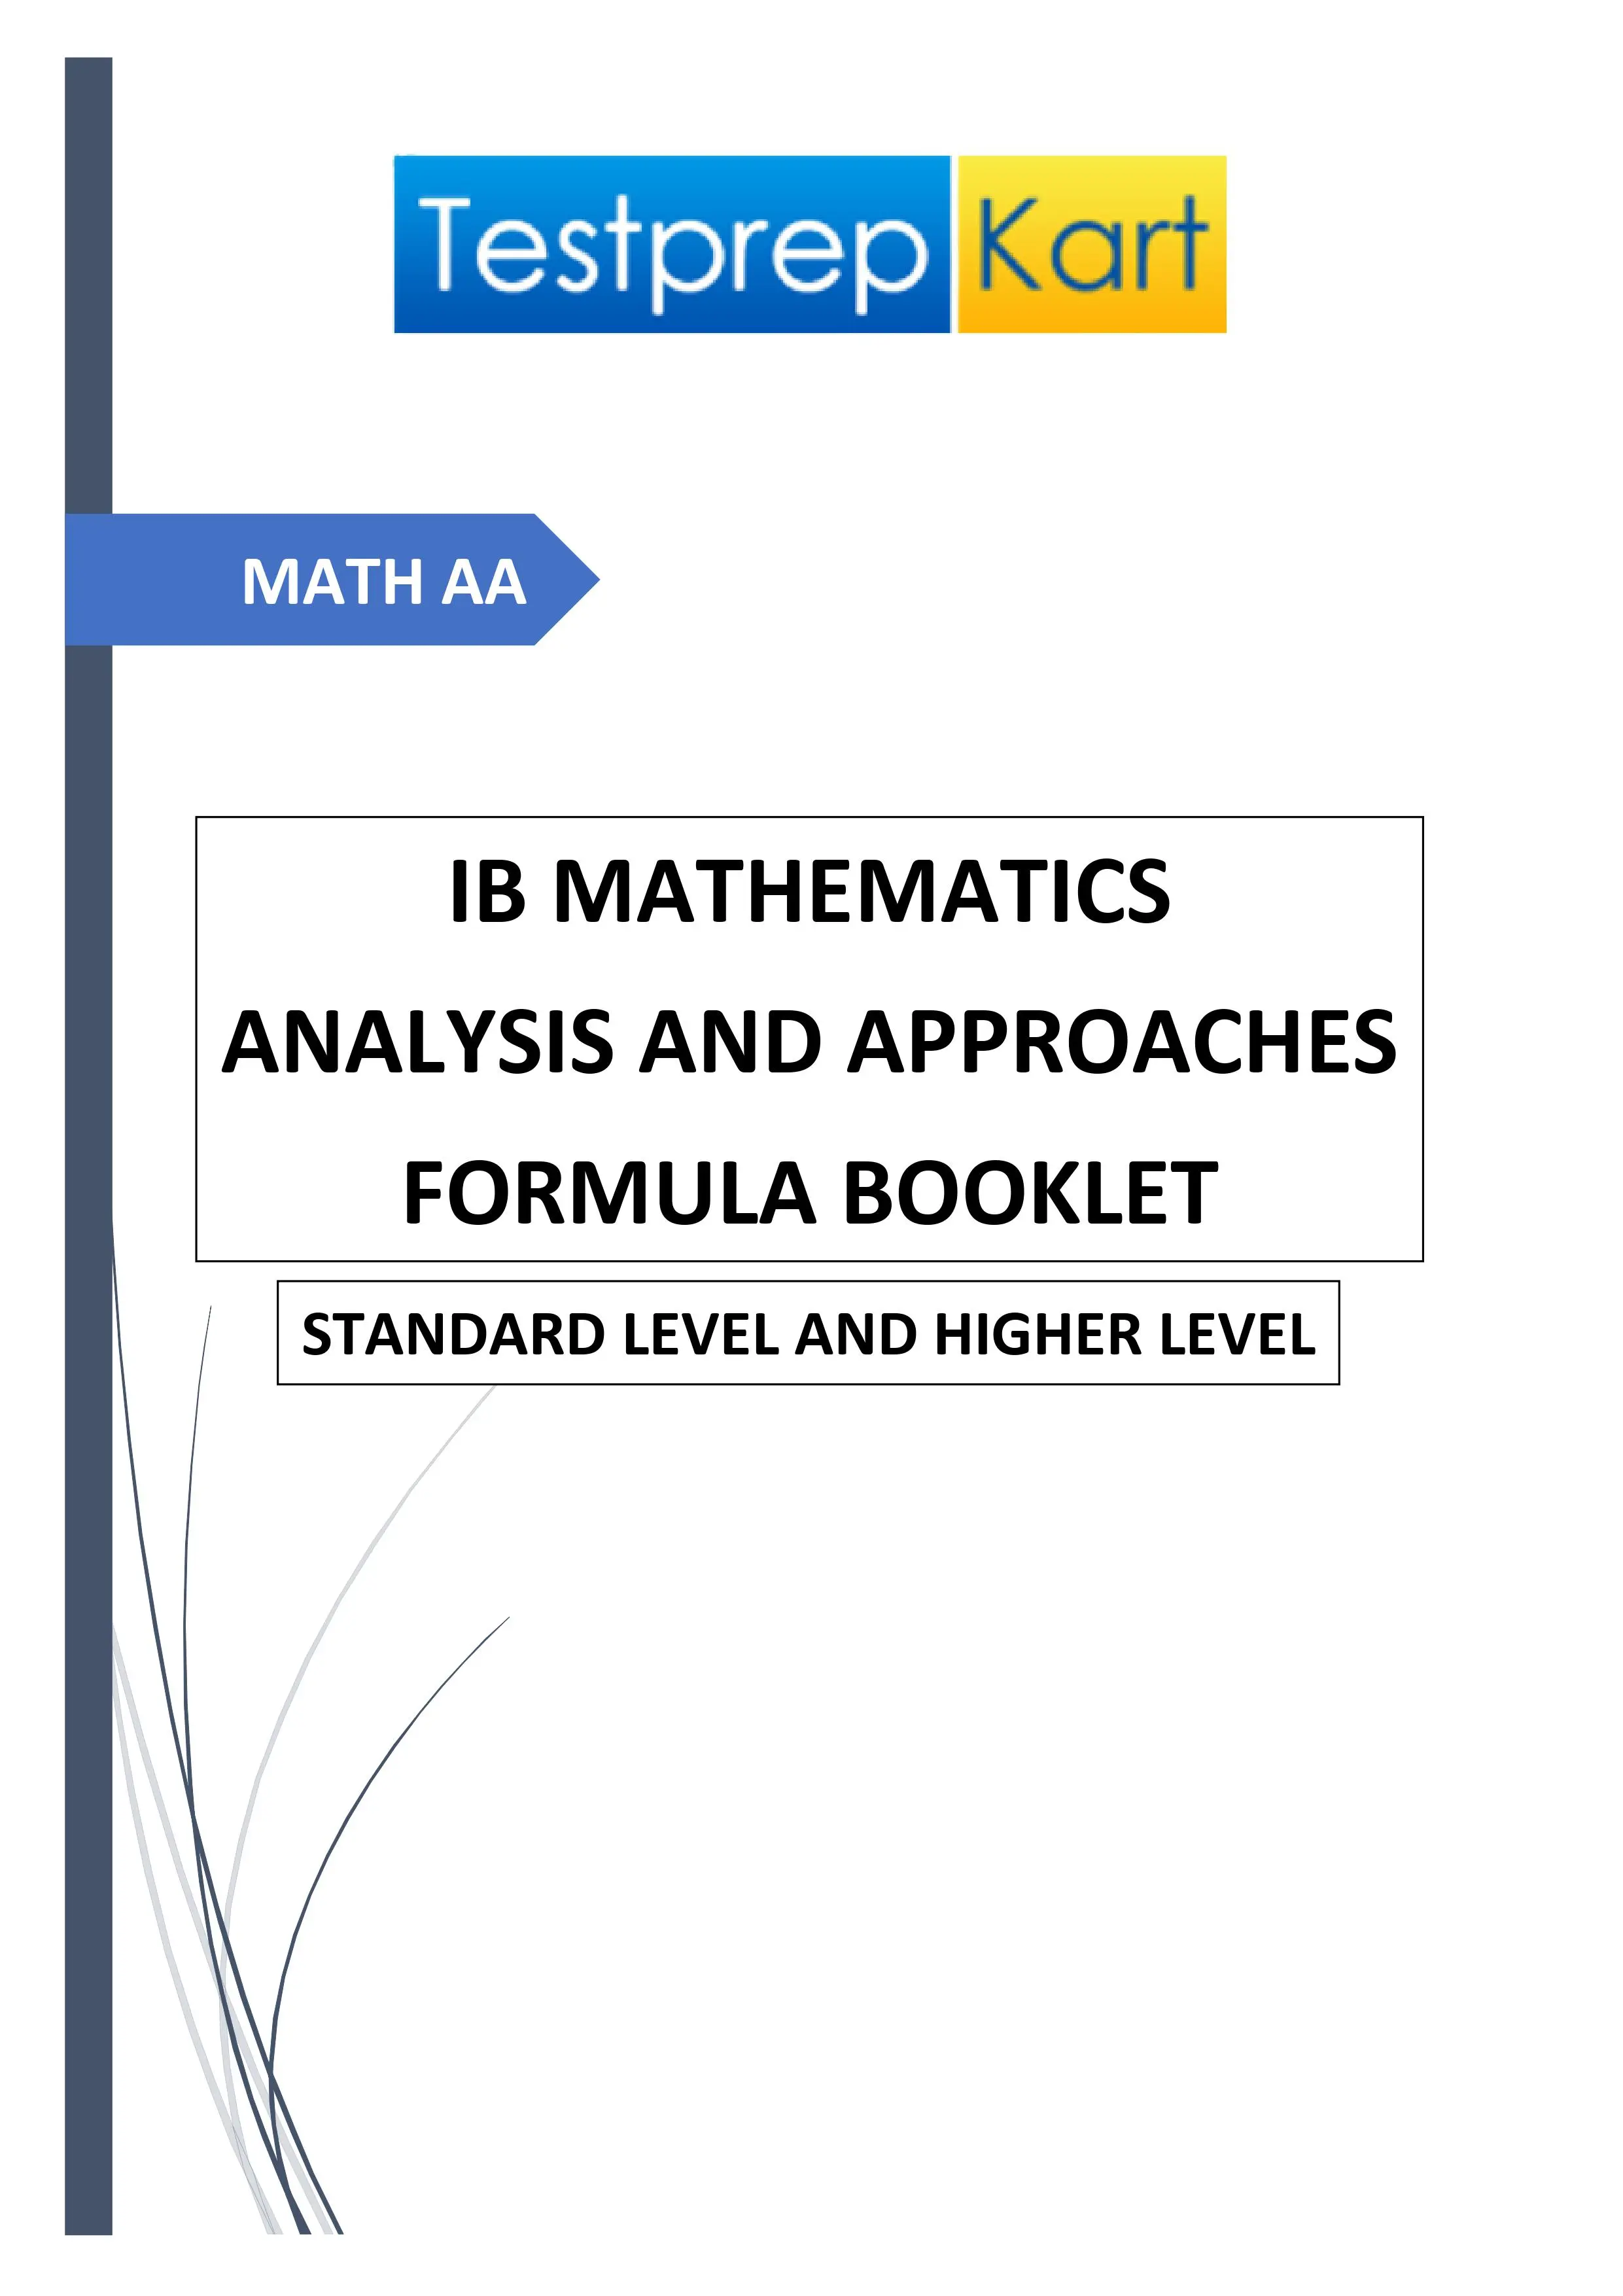 IB Math Analysis and Approaches Standard Level (SL) and Higher Level (HL) Formula Booklet Download